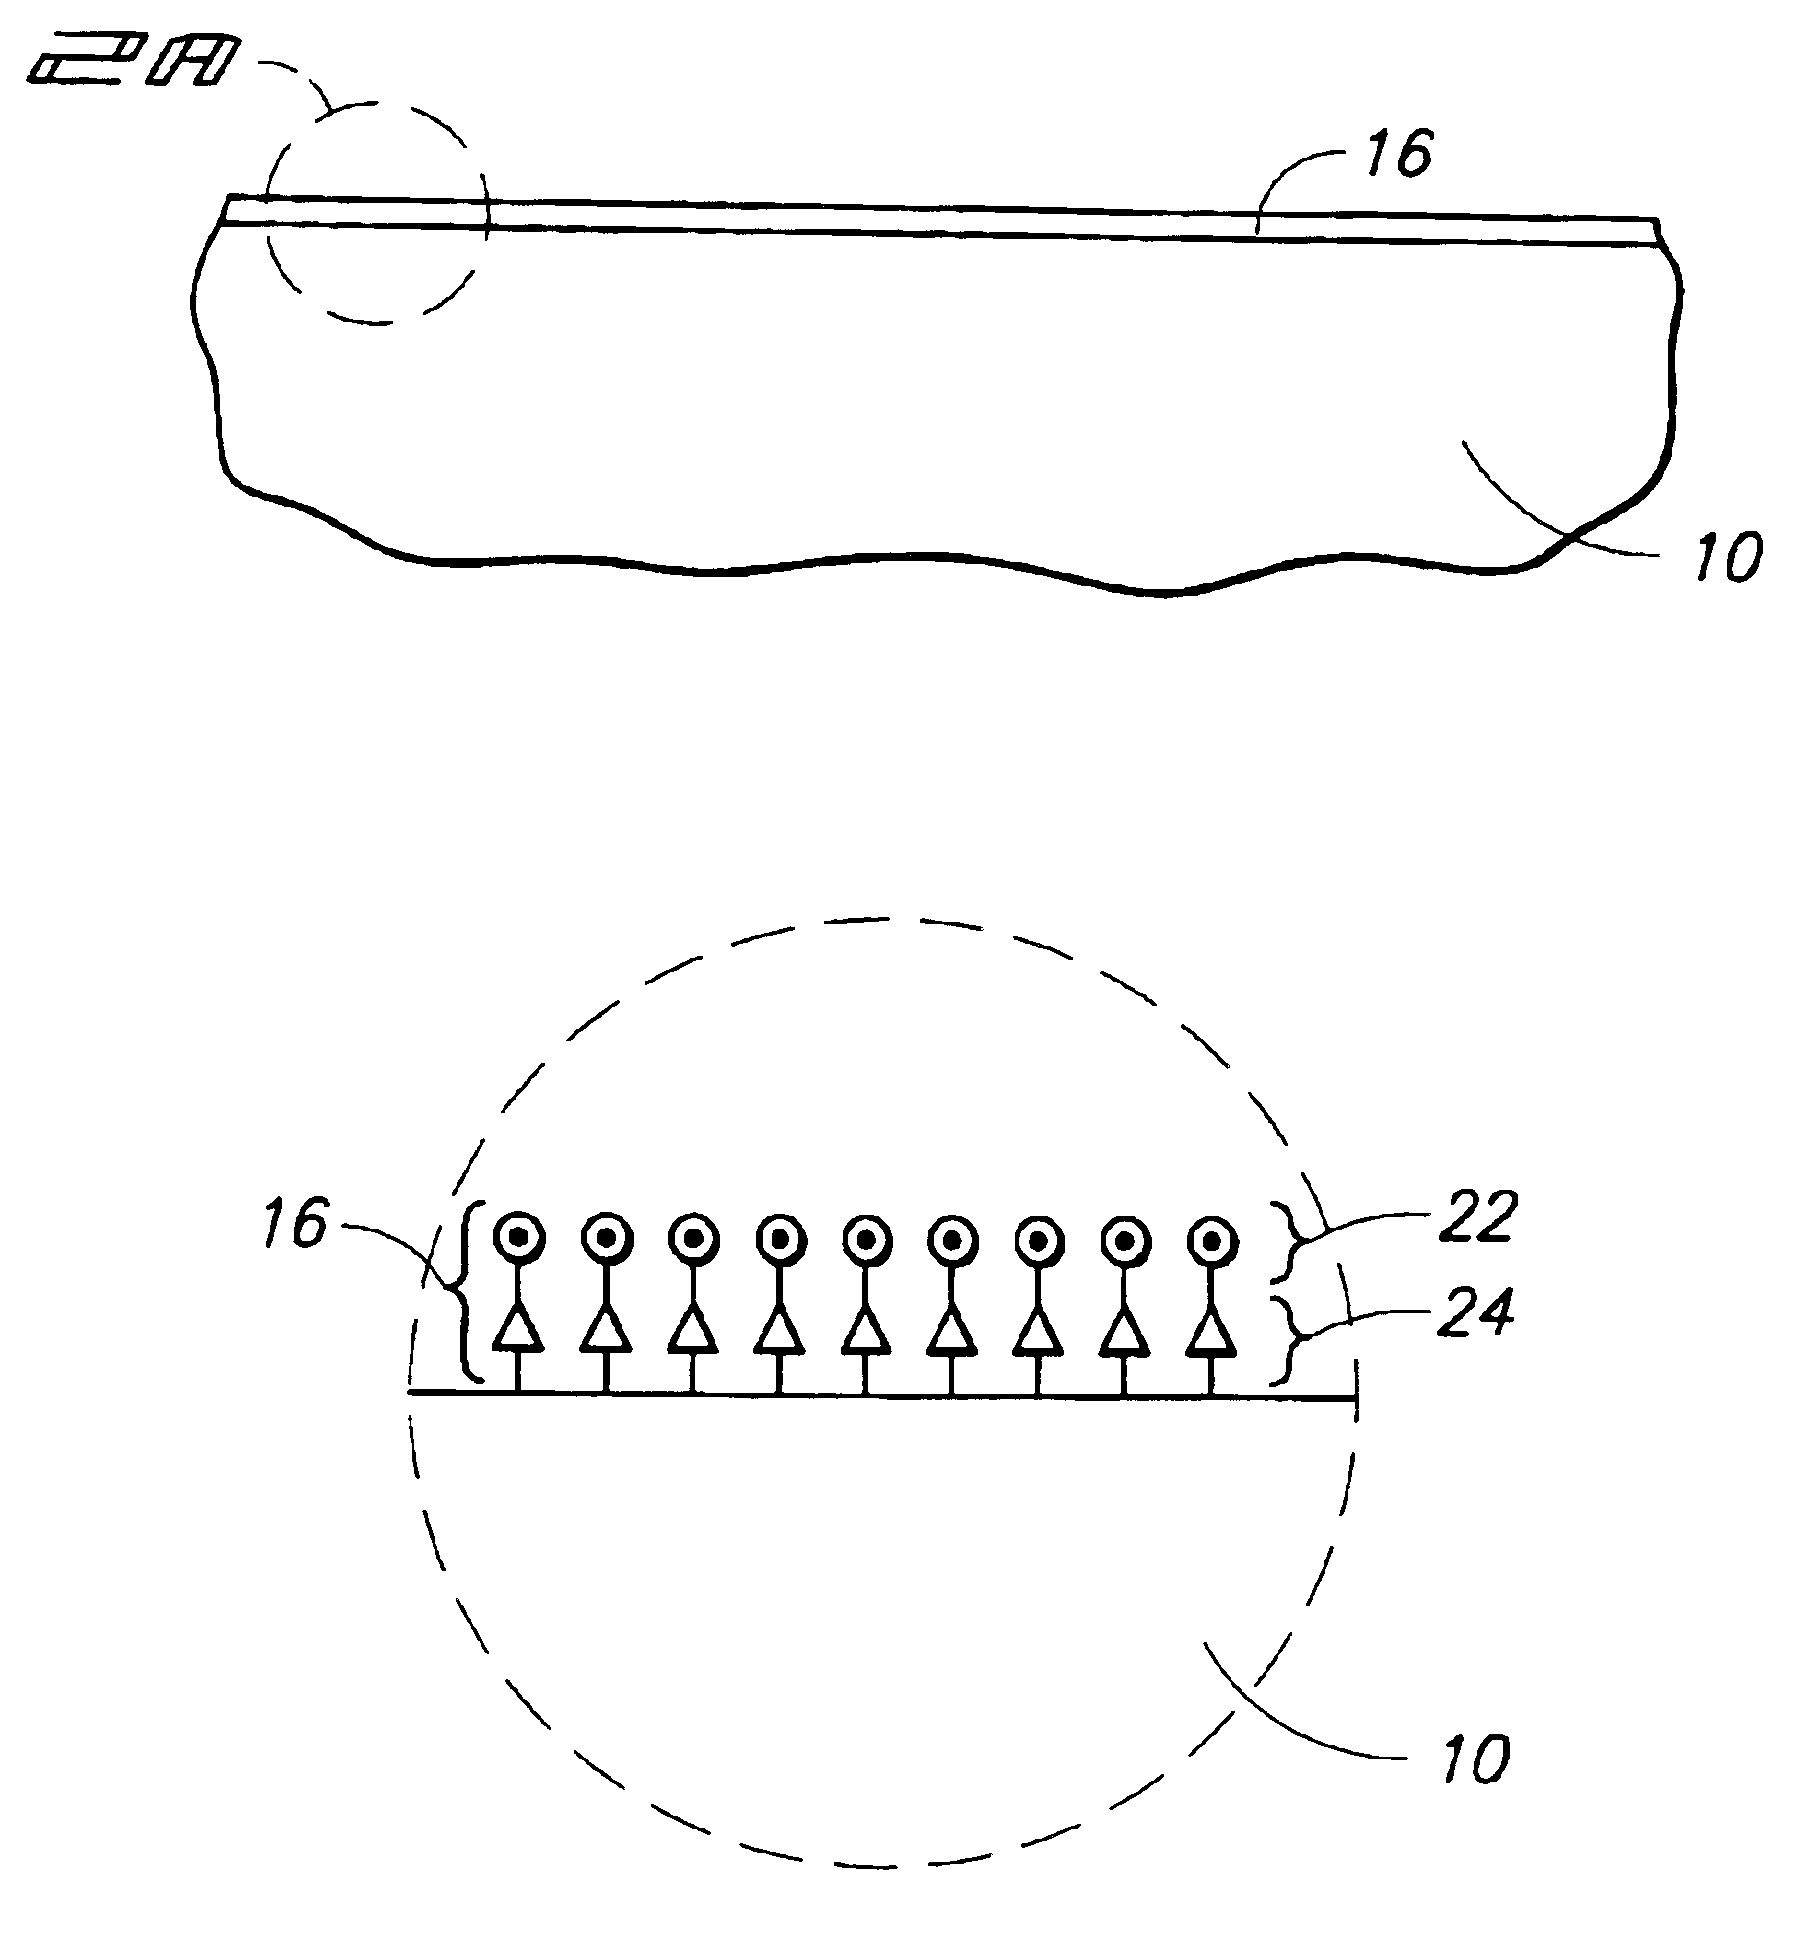 Composite dielectric forming methods and composite dielectrics